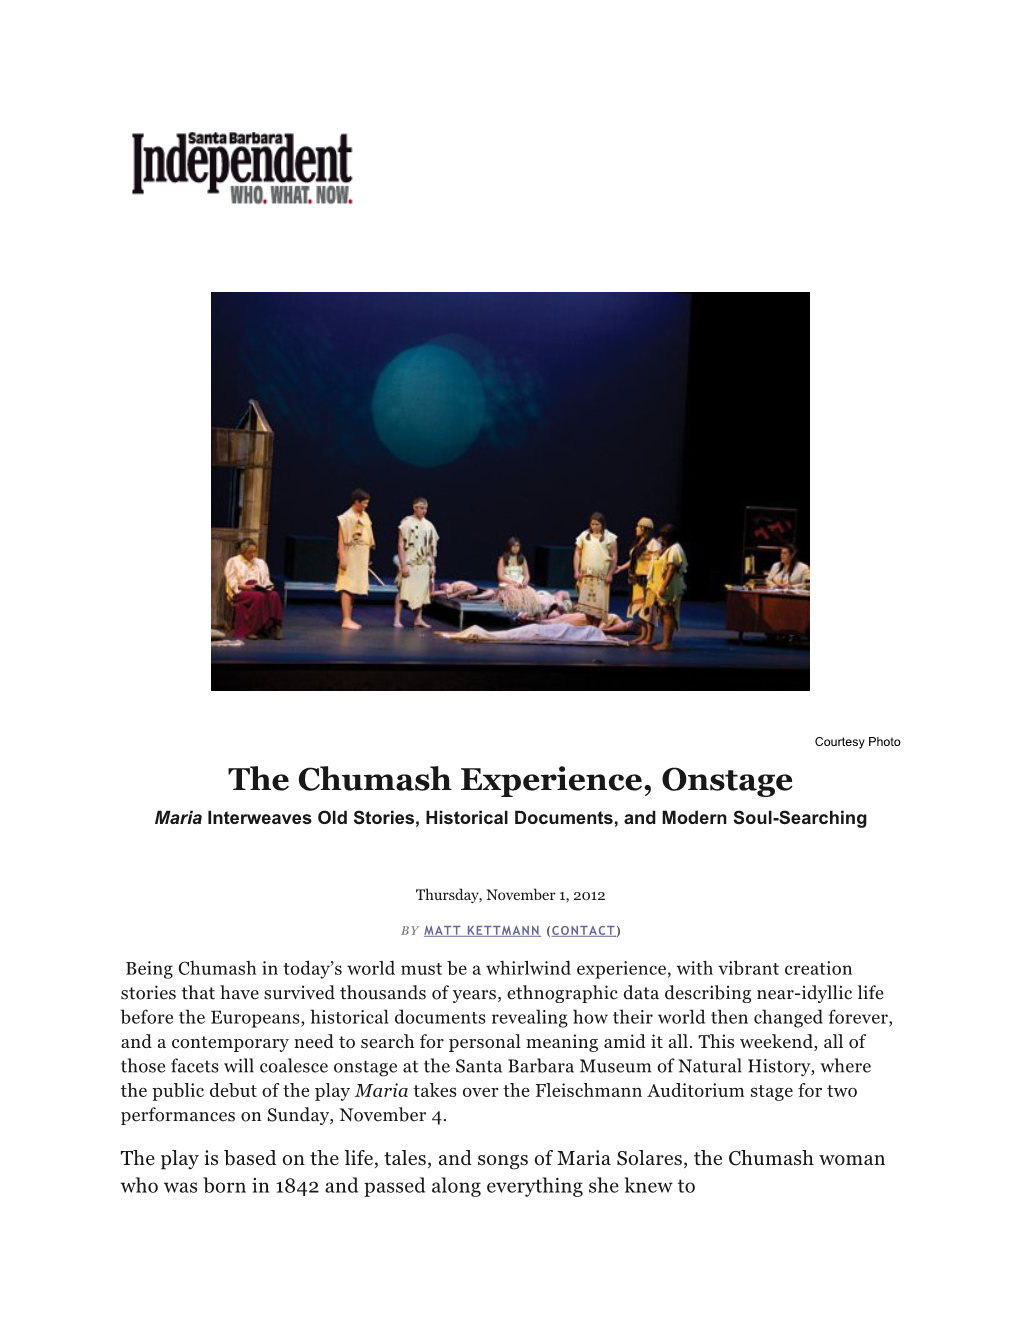 The Chumash Experience,Onstage